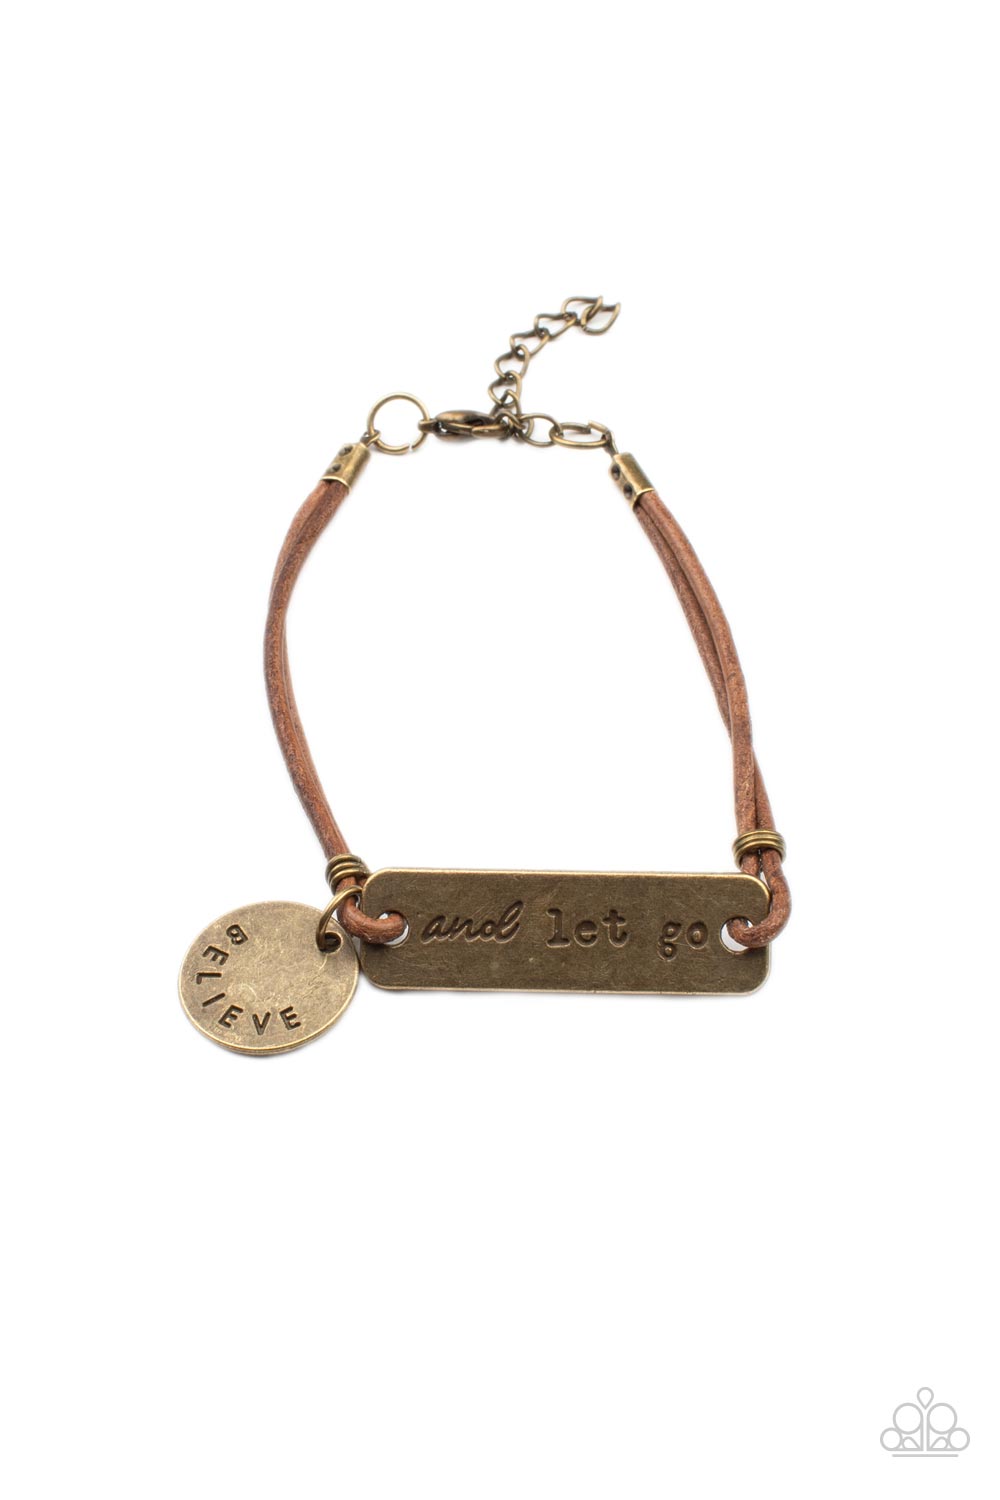 Believe and Let Go - Brass - The V Resale Boutique